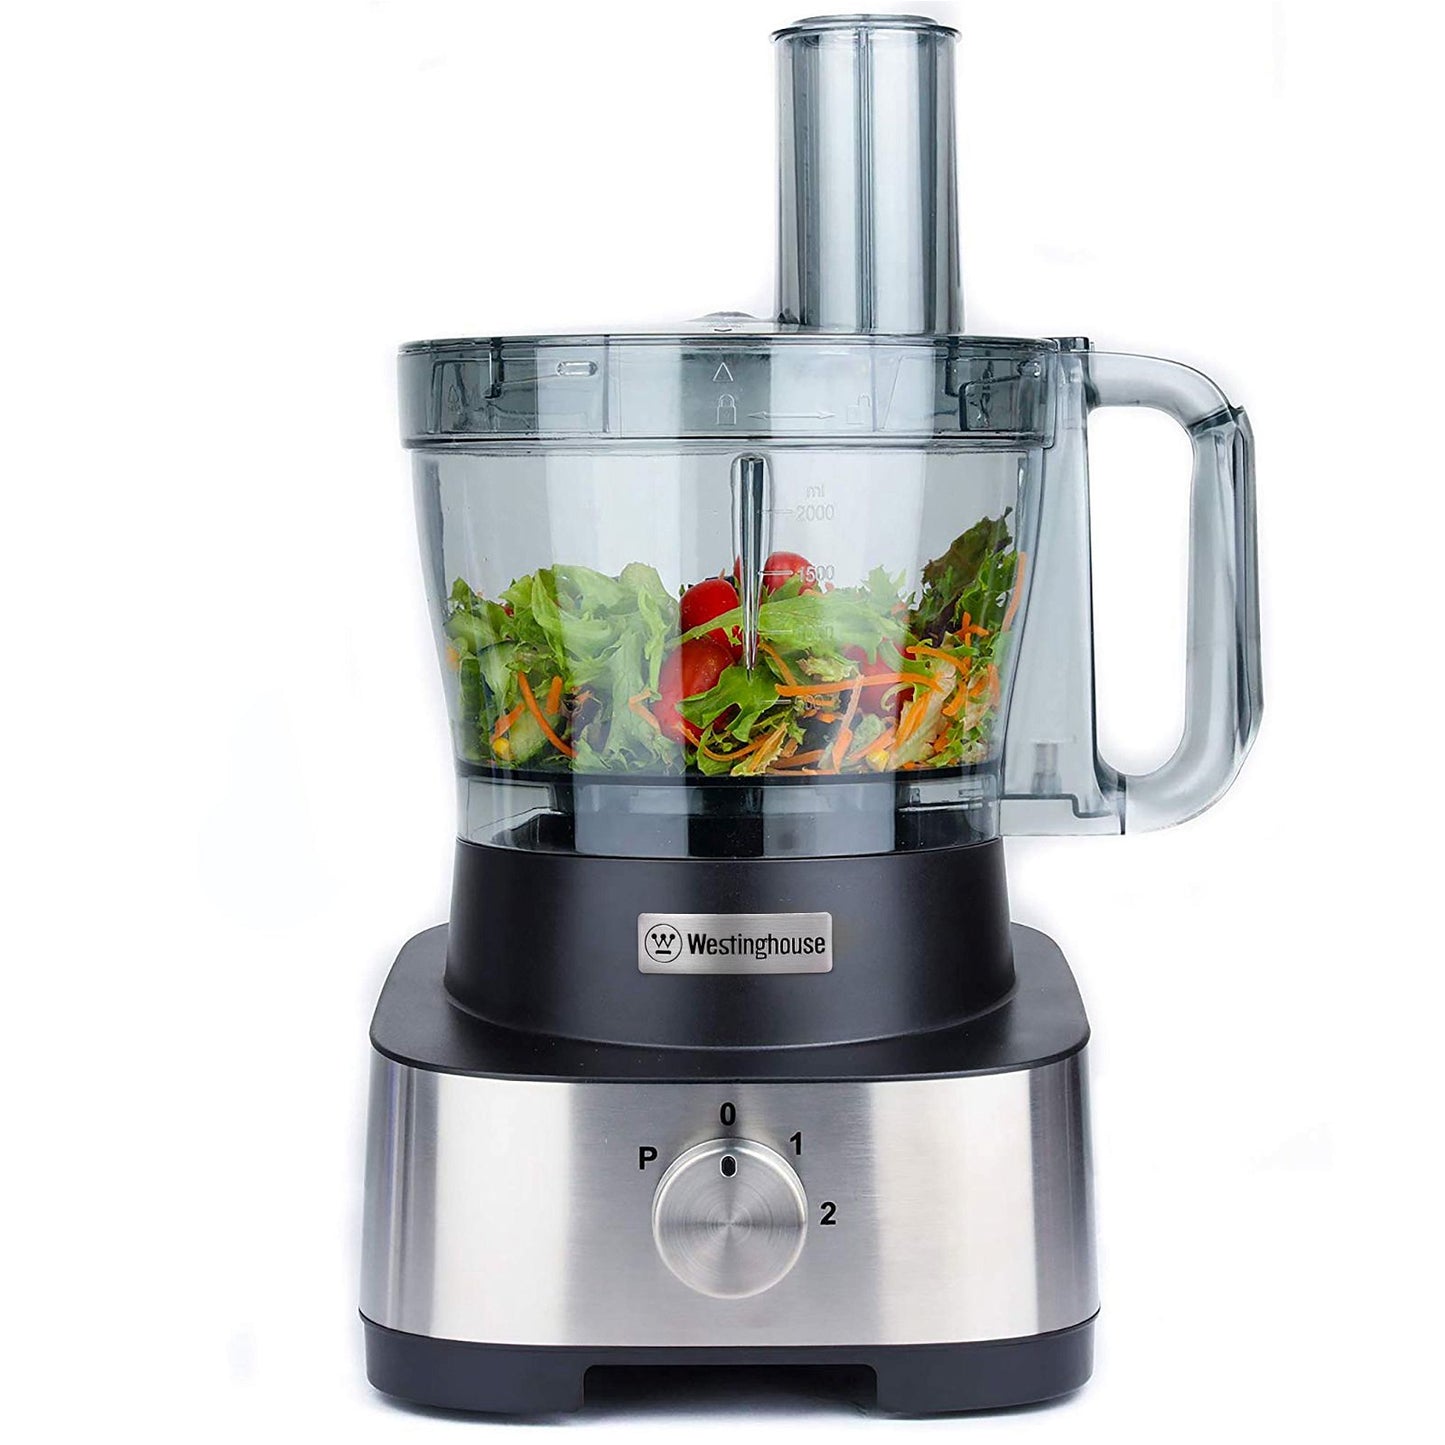 Westinghouse Food Processor 1000W Extra Large 3.5L Bowl-#product_category#- Distributed by:  under license